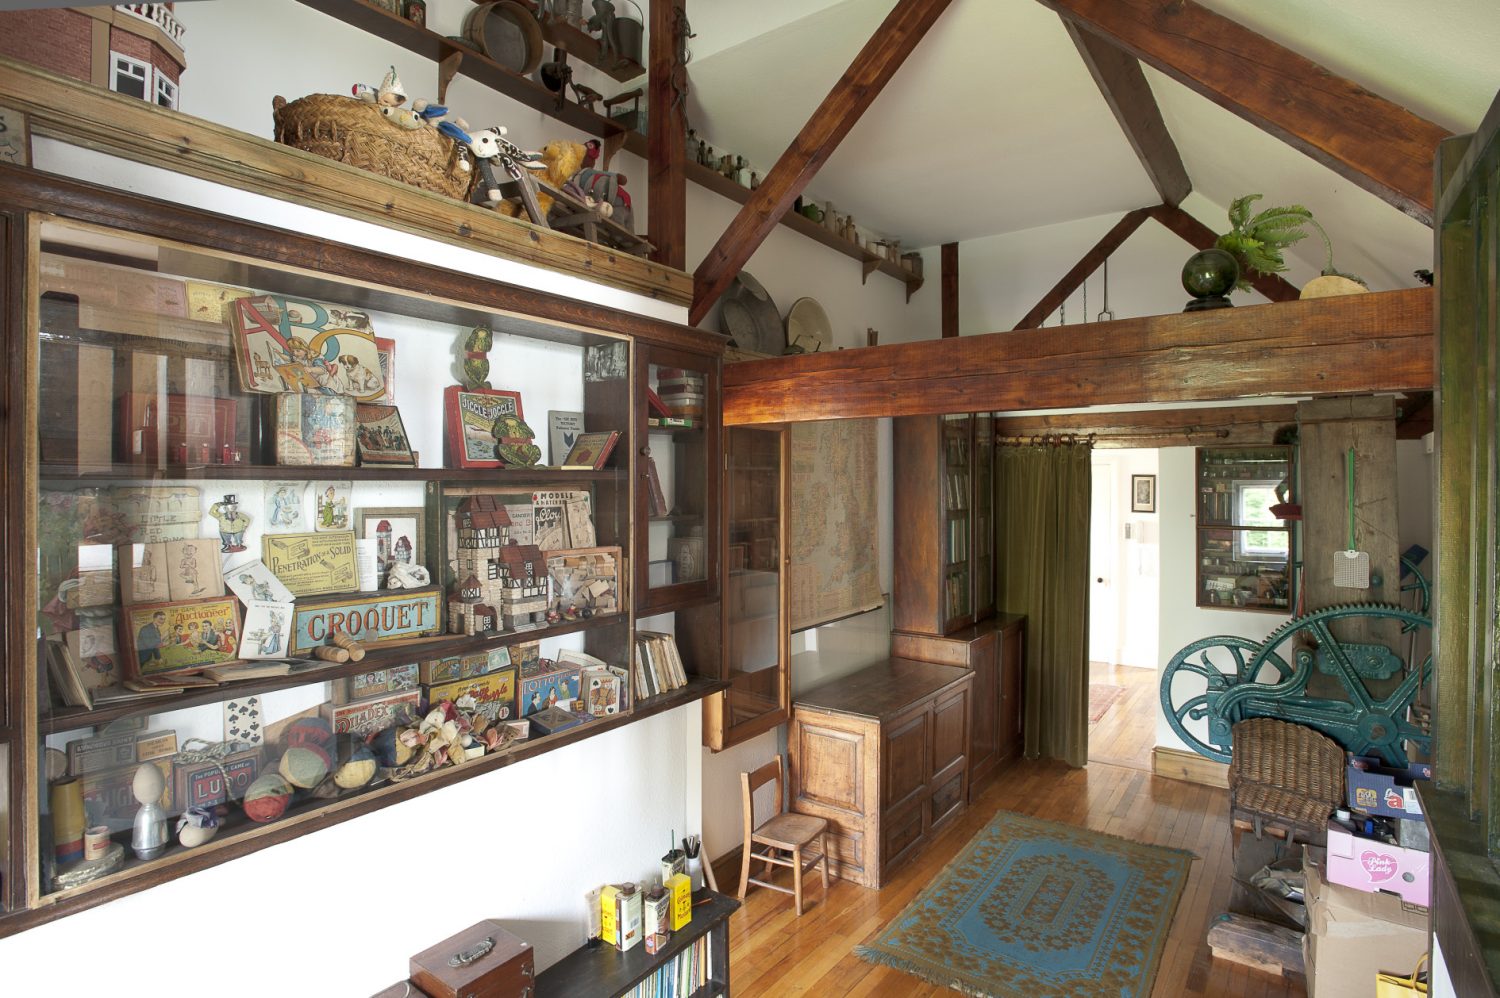 Upstairs a secondary hallway, home to an old hop press, has walls festooned with old farm tools, cabinets filled with children’s games and writing and drawing tools